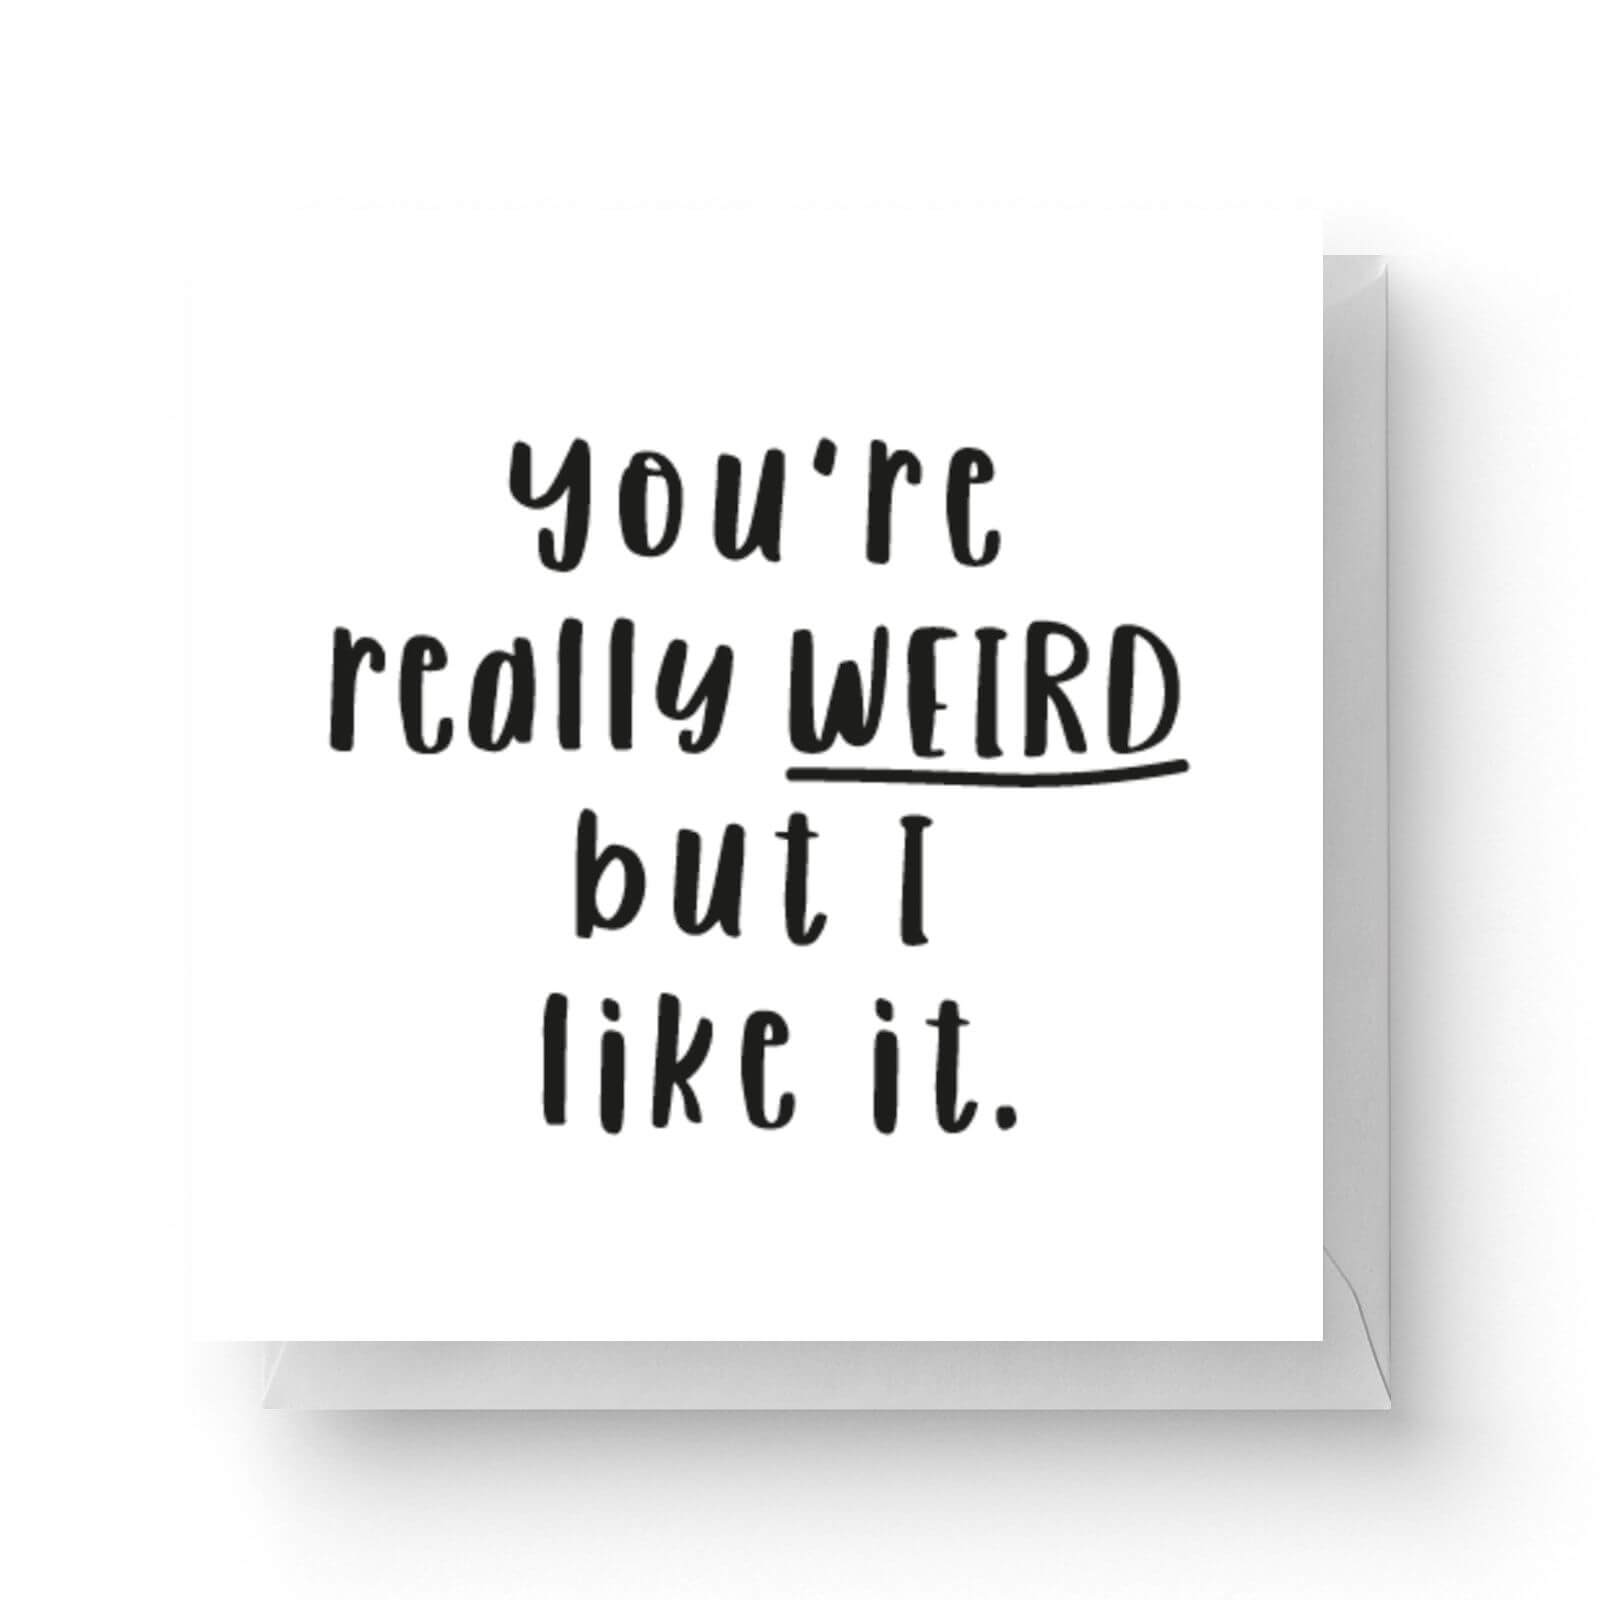 Youre Really Weird But I Like It Square Greetings Card 148cm X 148cm